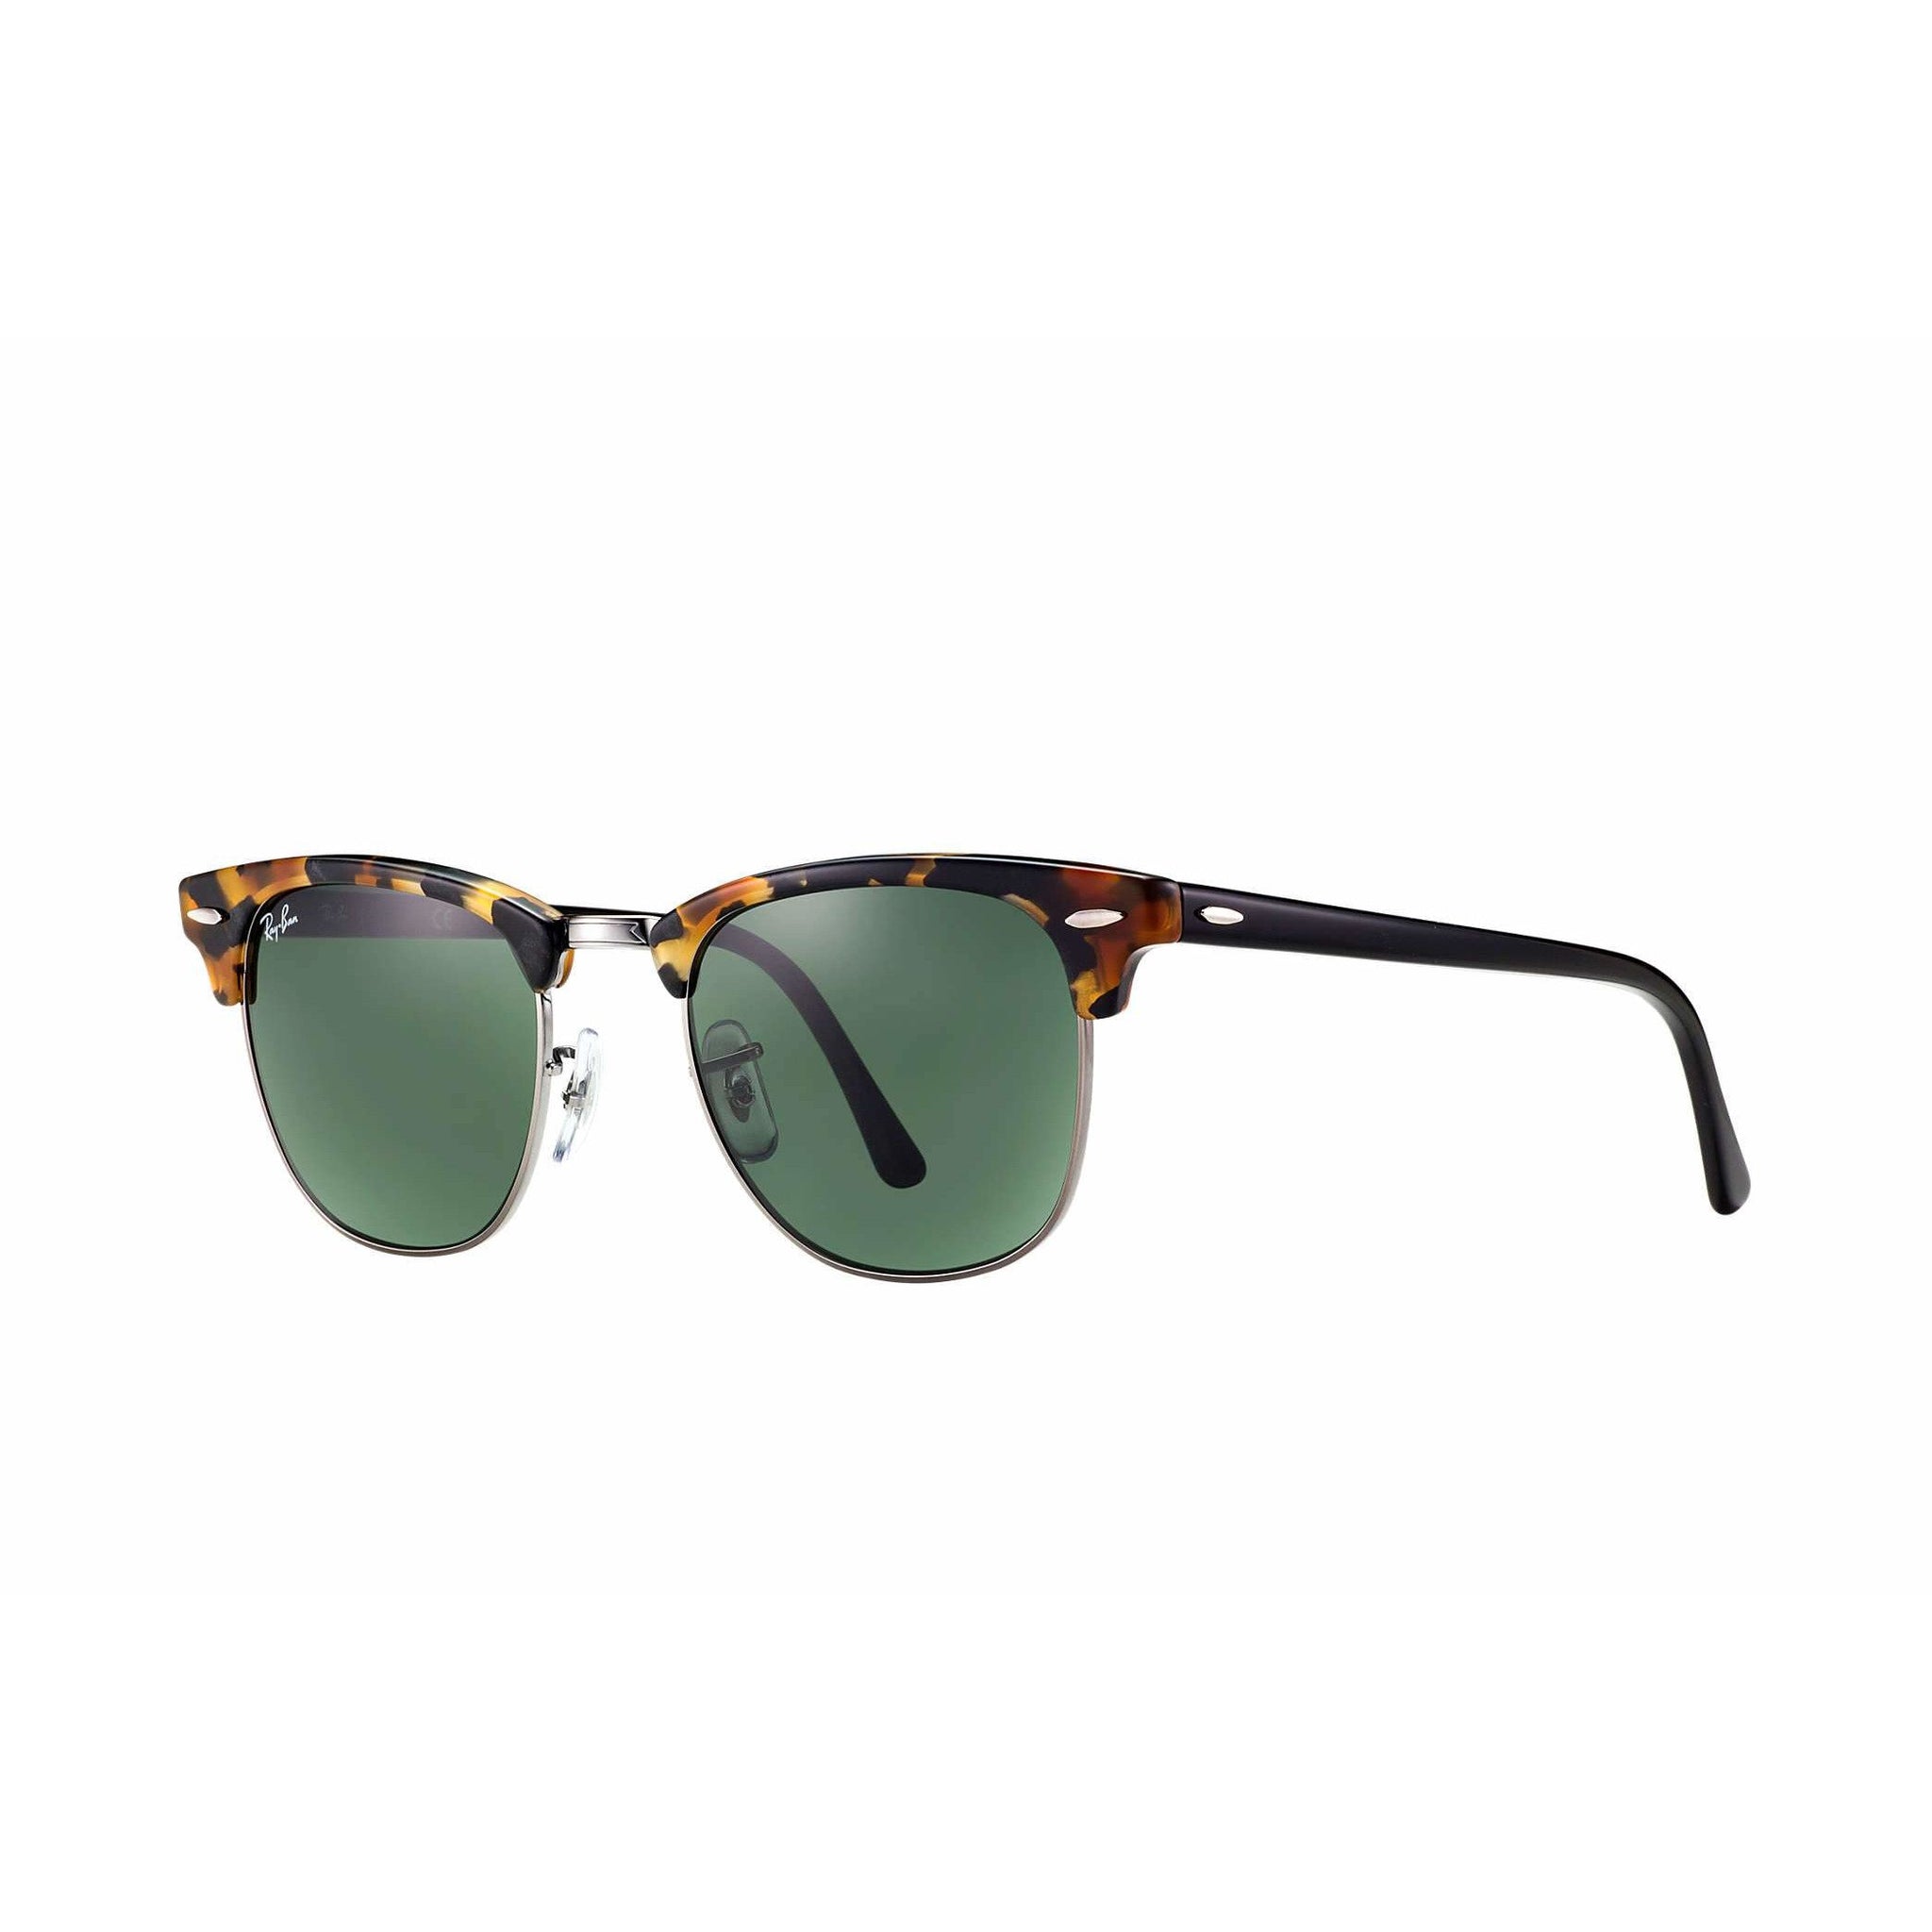 [RB3016-1157] Mens Ray-Ban Clubmaster Sunglasses